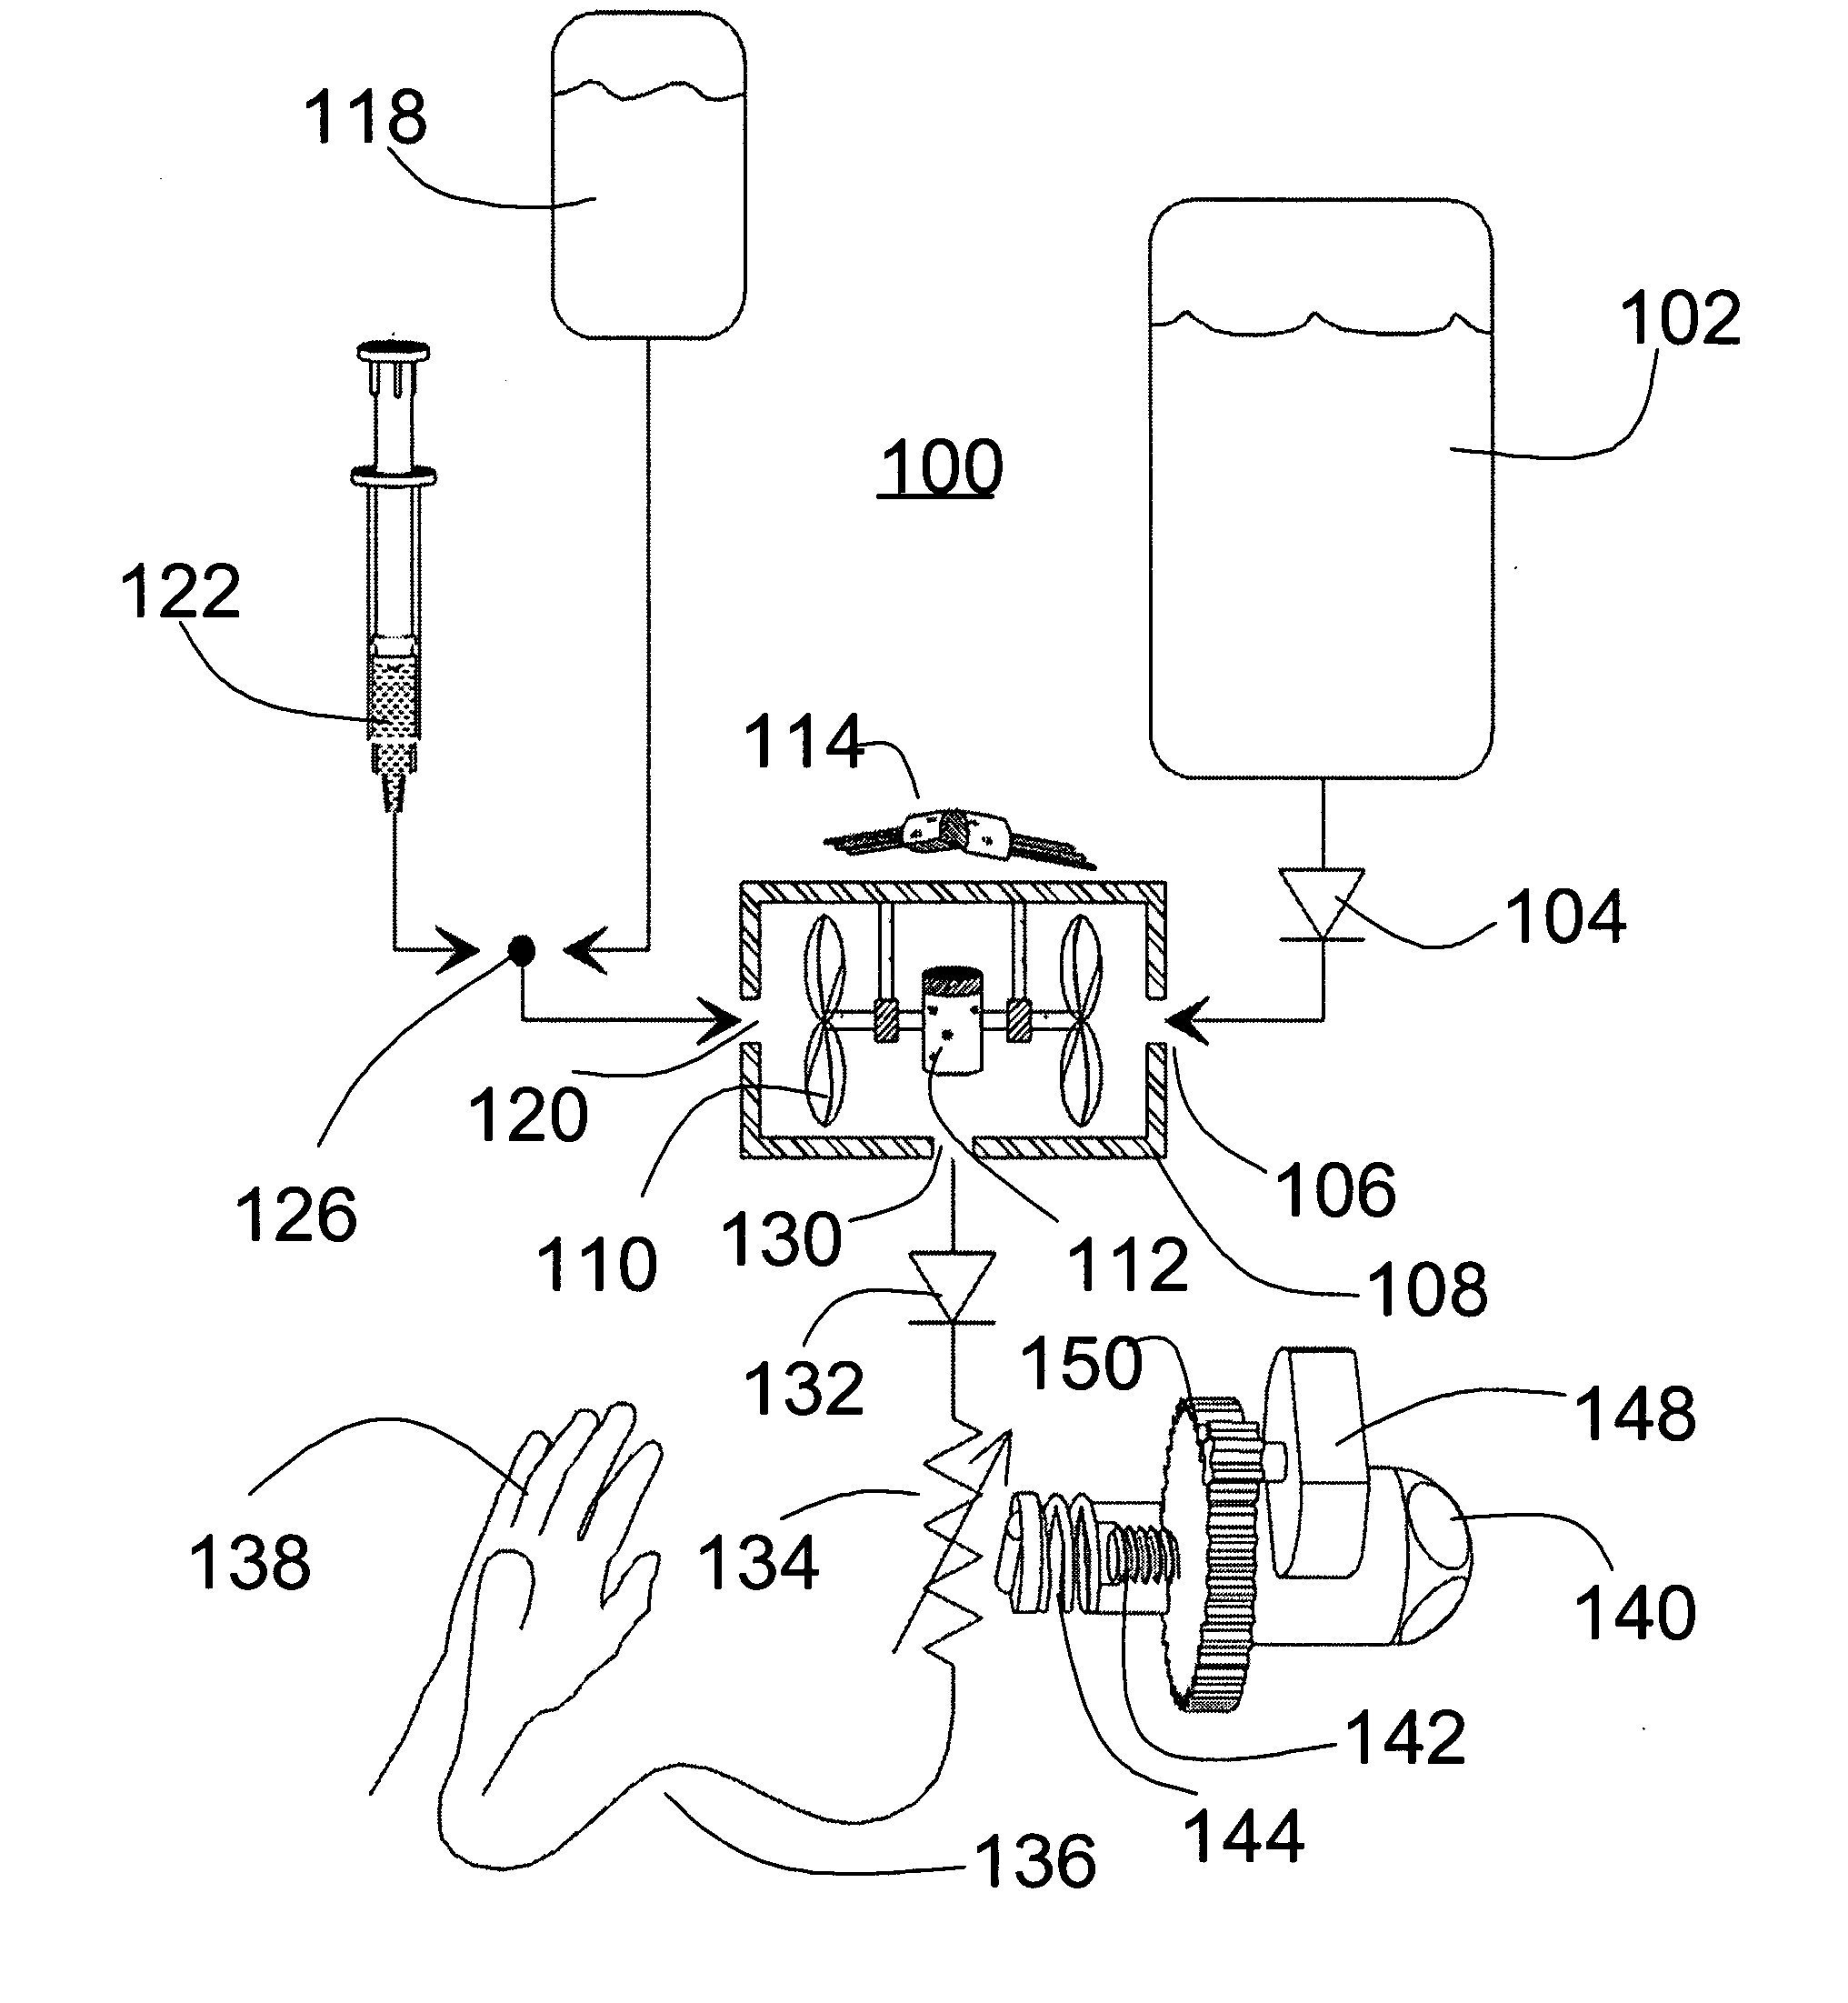 Automated fluid flow control system